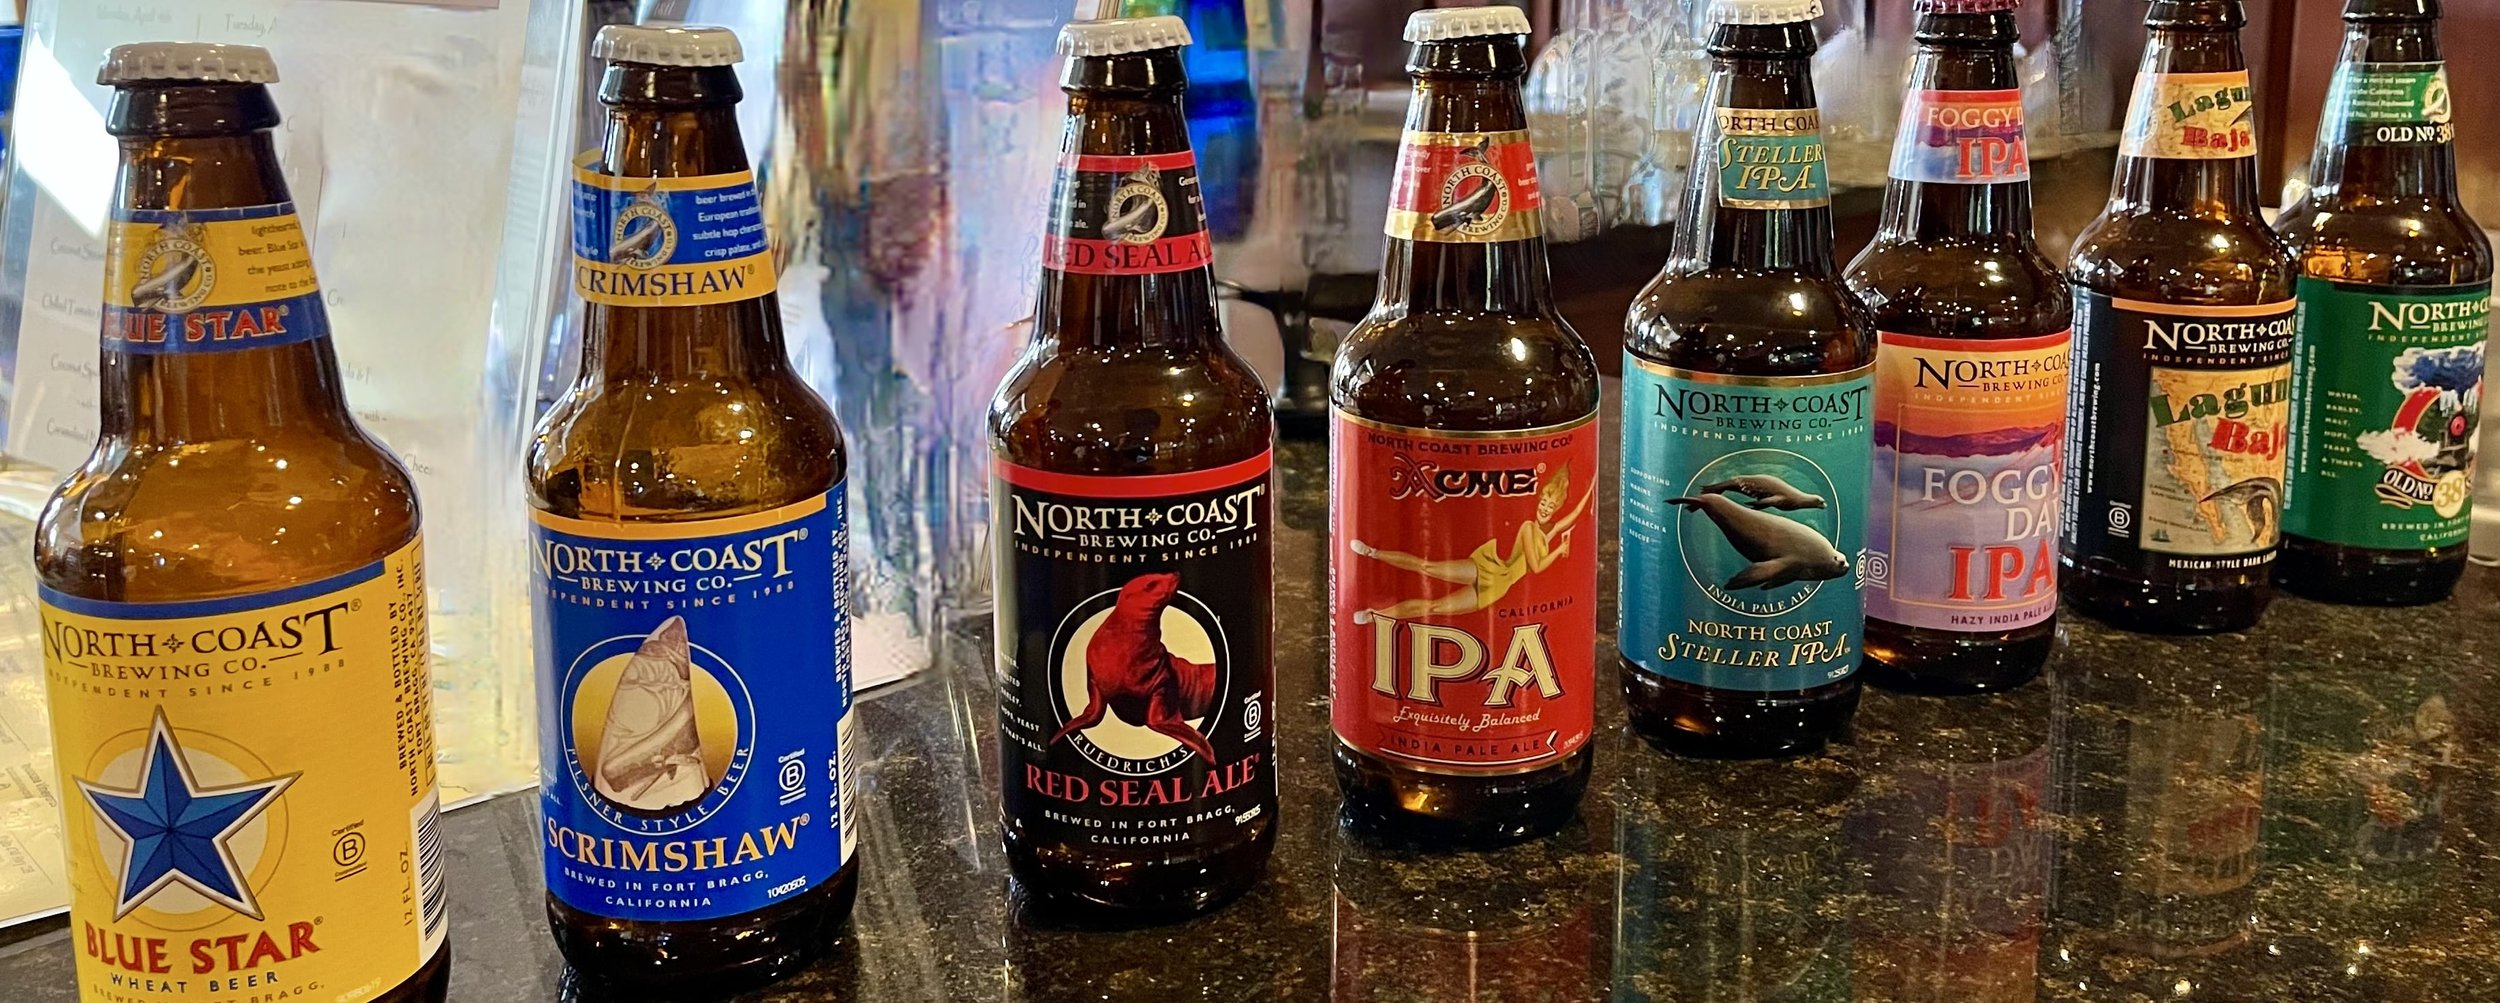 A selection of beers from North Coast Brewing Company